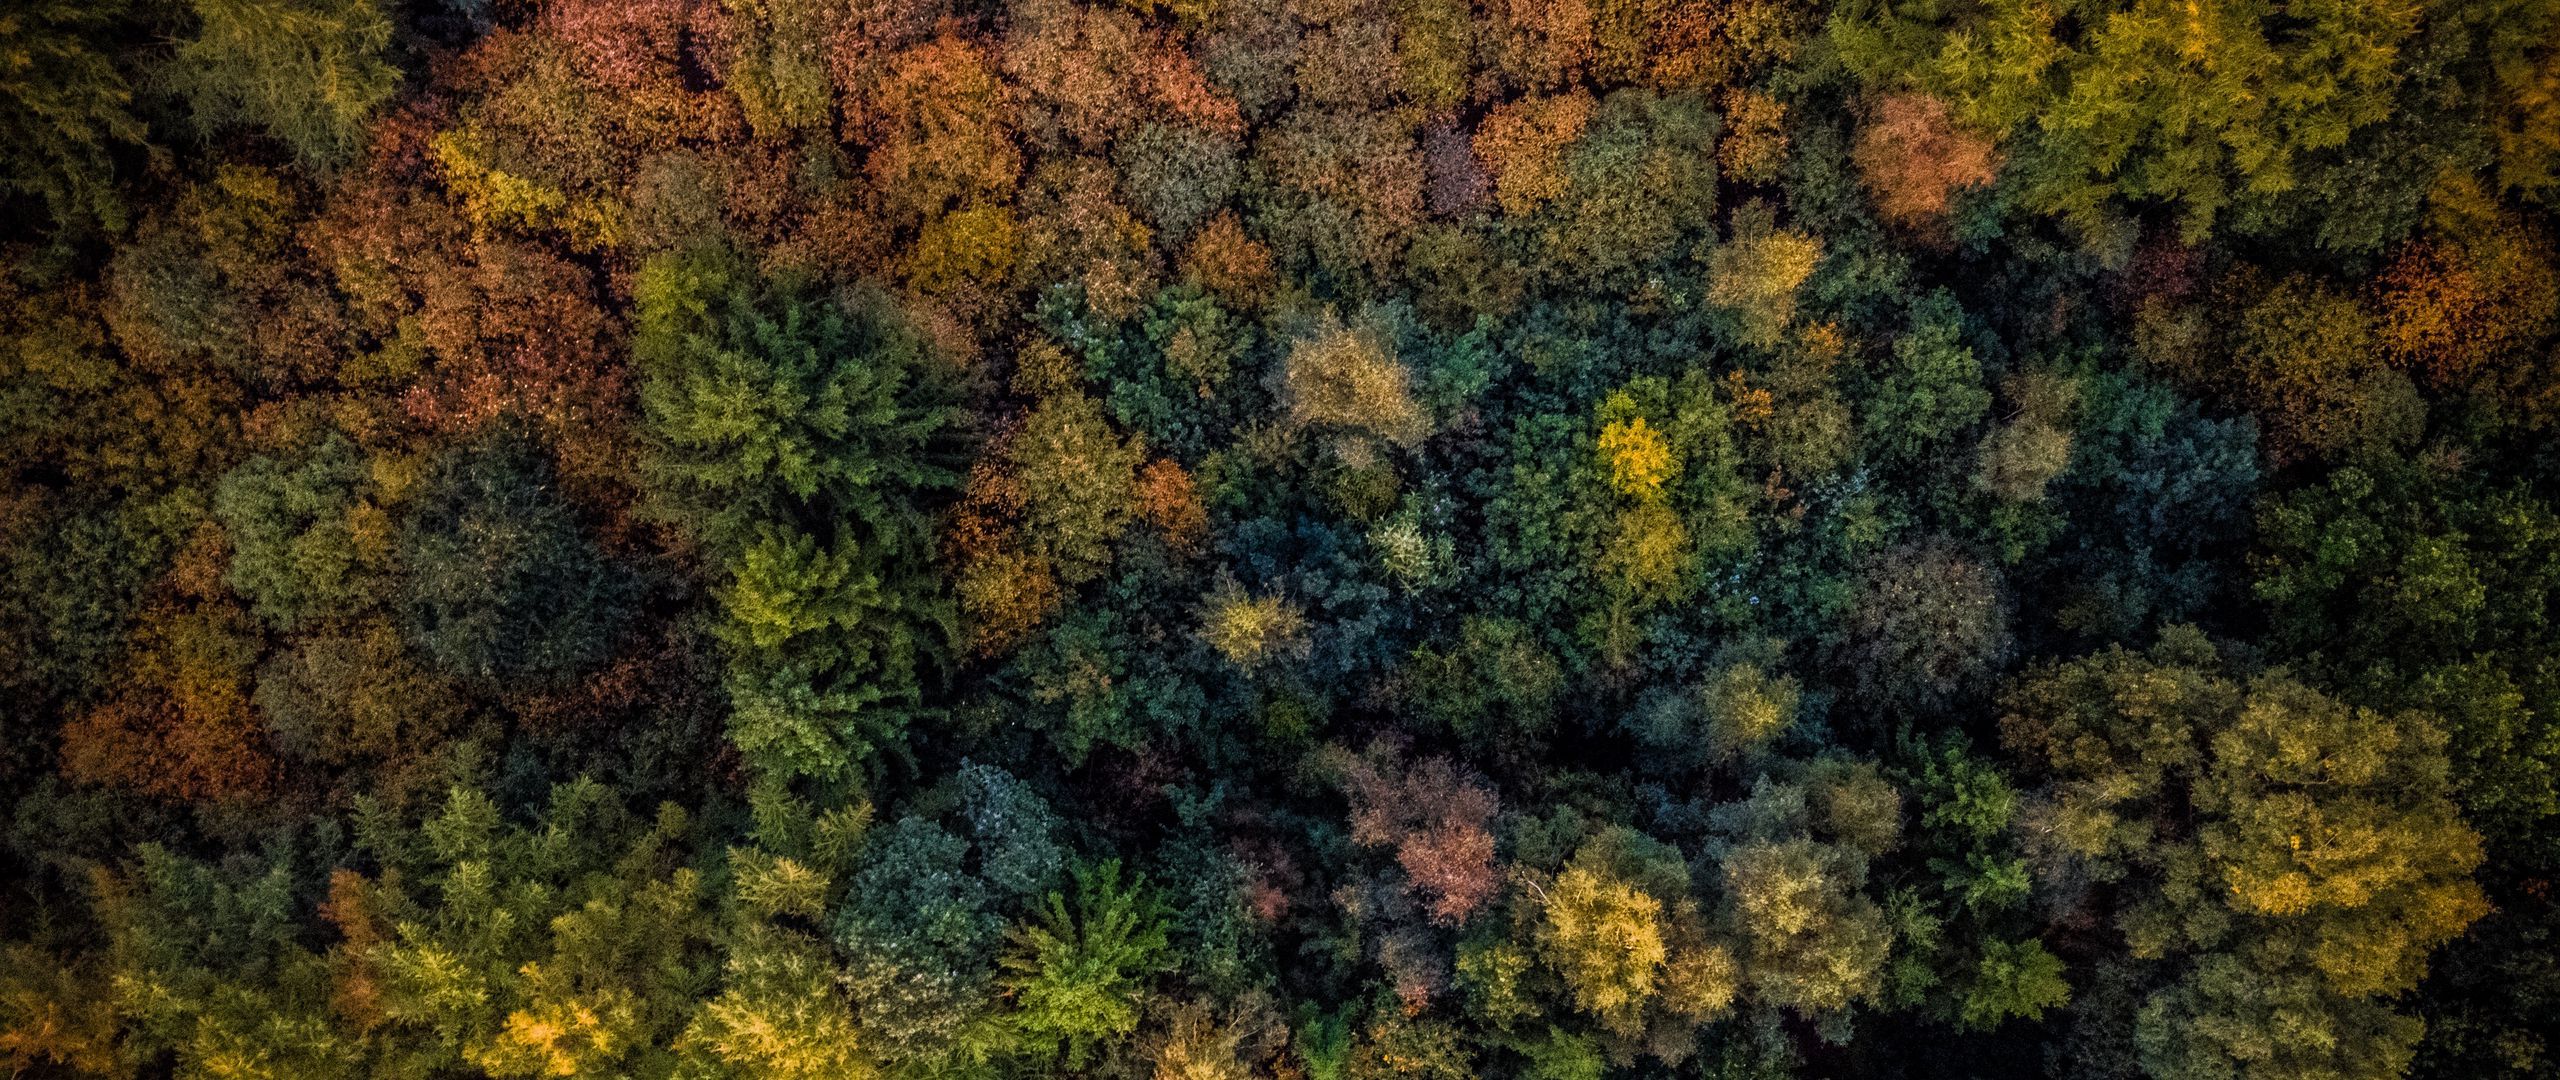 Download wallpaper 2560x1080 trees, view from above, autumn dual wide 1080p HD background